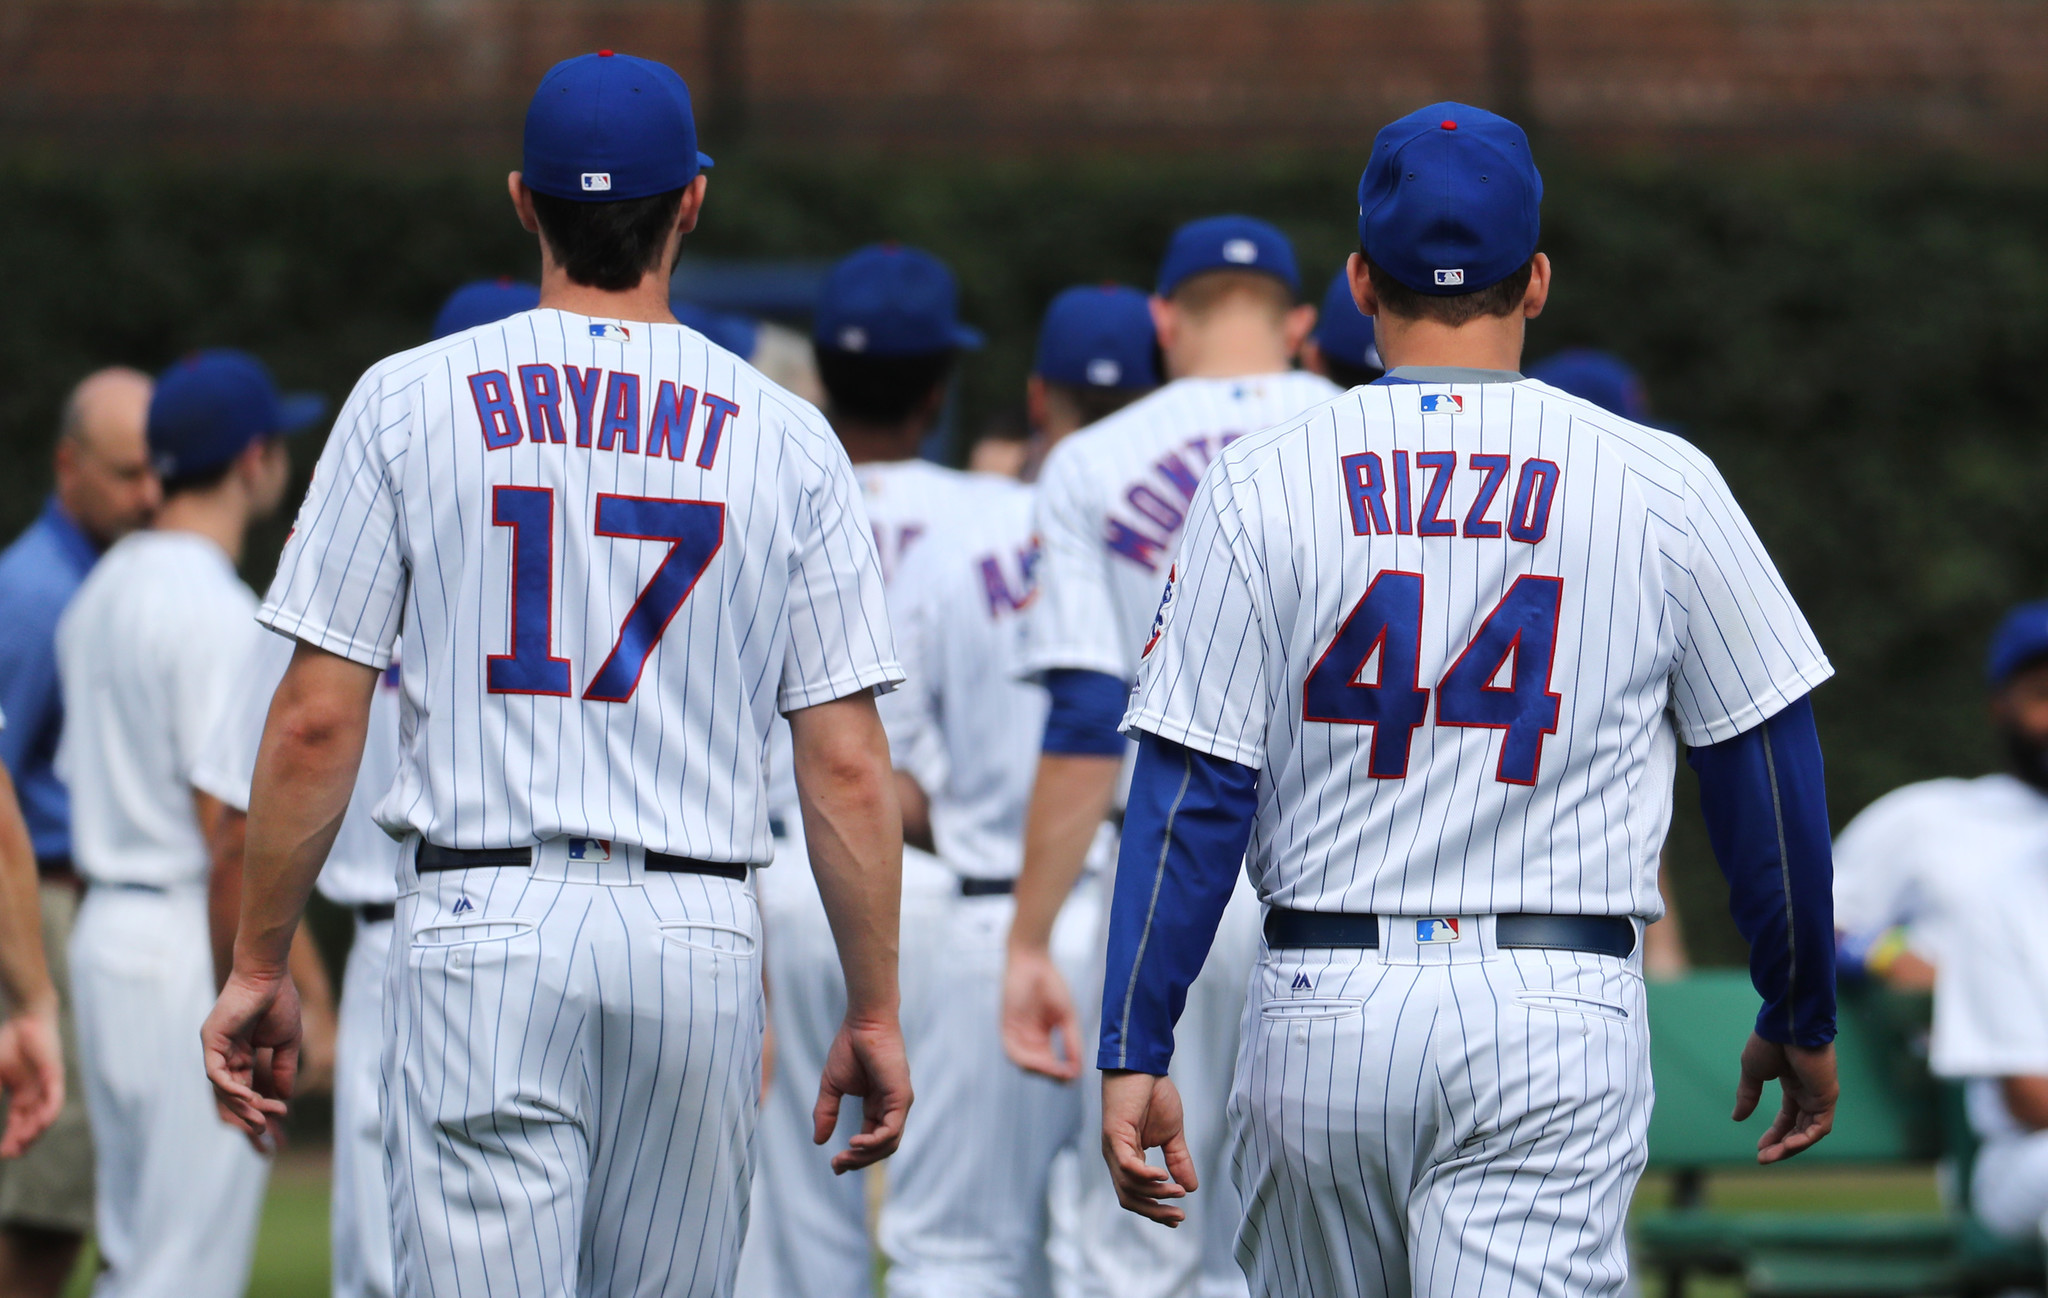 What's next for Bryzzo? Bryant shares funny vision of his future with Rizzo